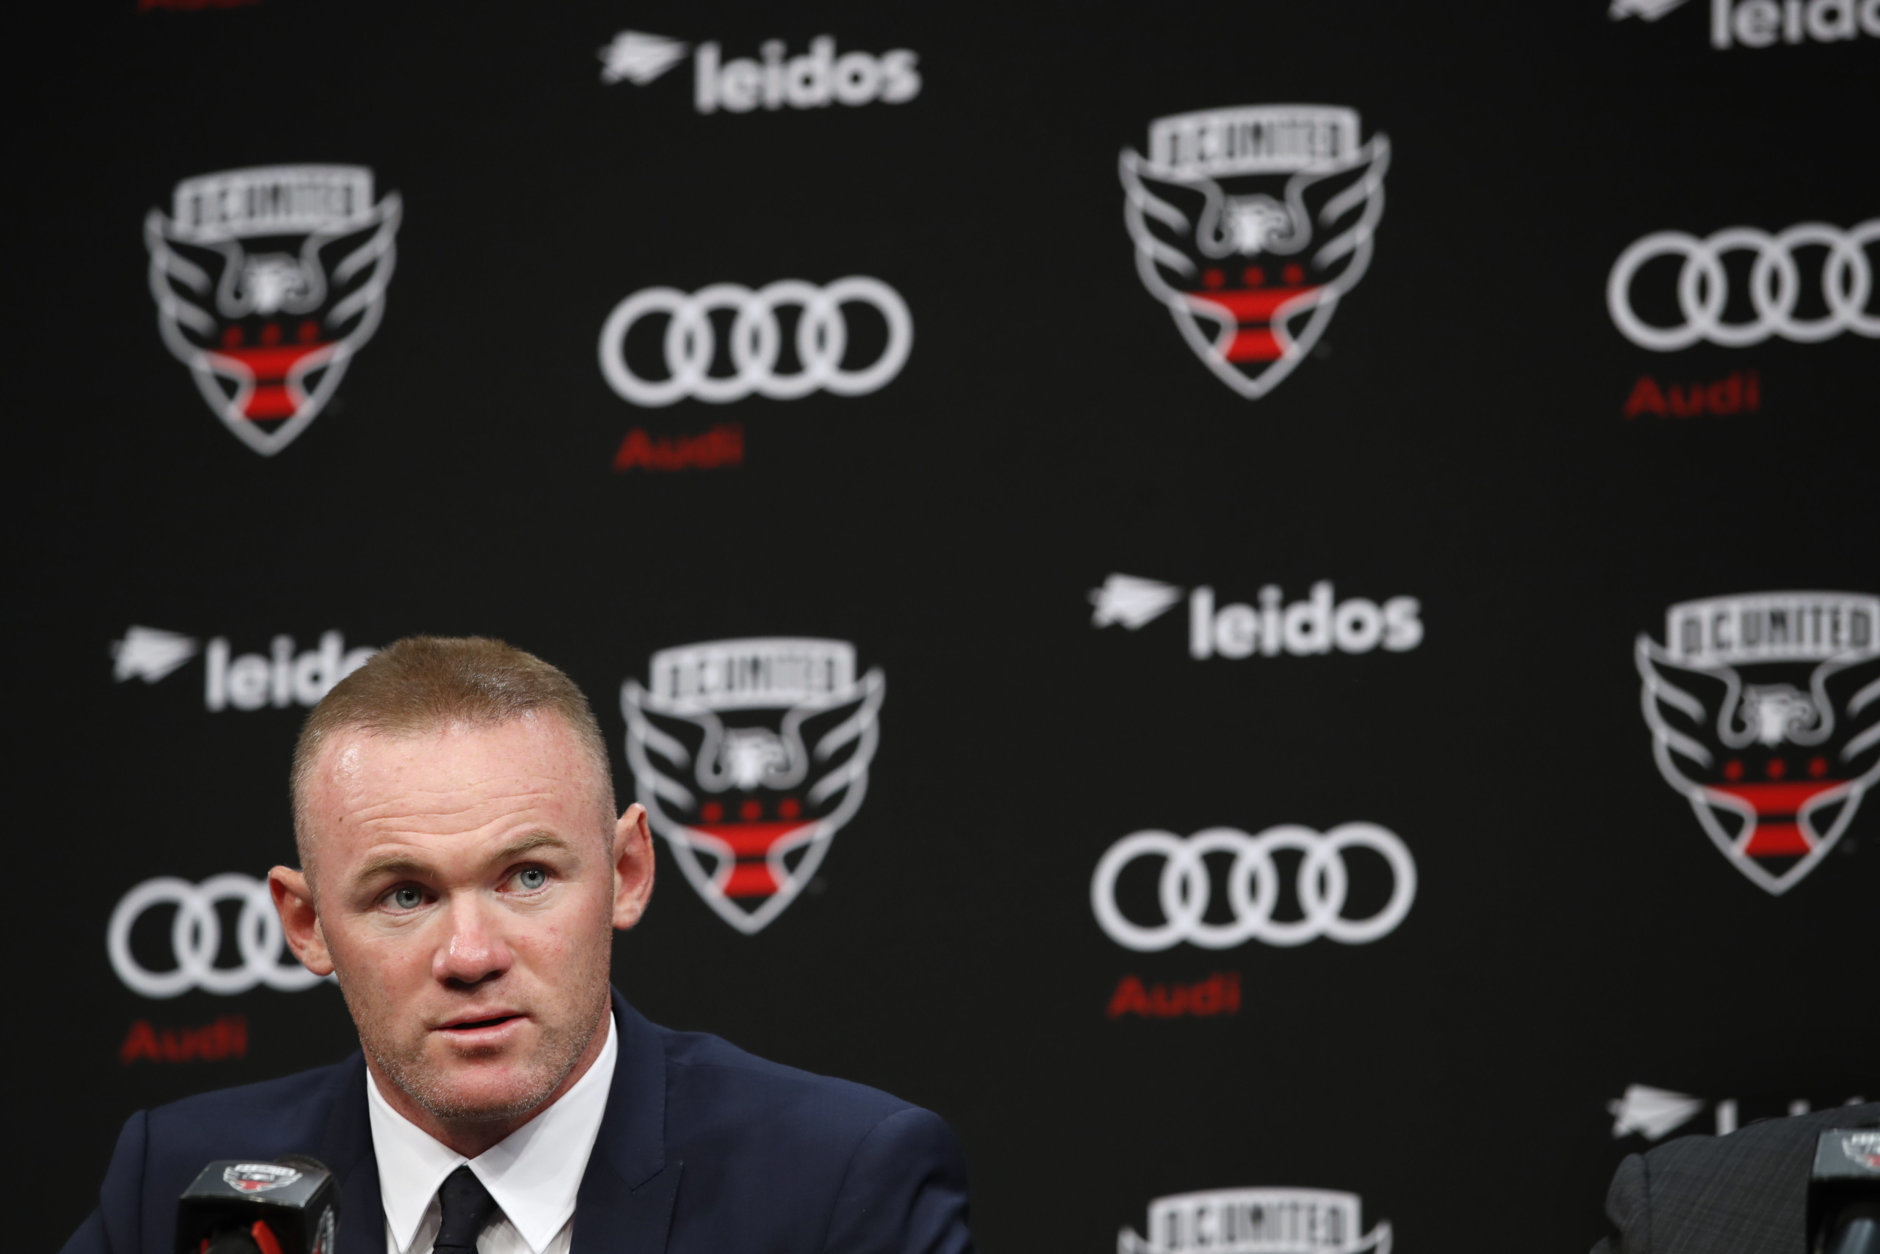 English soccer star Wayne Rooney, the all-time leading scorer for England's national team and Manchester United in the Premier League, speaks at a news conference announcing his signing with MLS team D.C. United, Monday, July 2, 2018, at the Newseum in Washington. (AP Photo/Jacquelyn Martin)